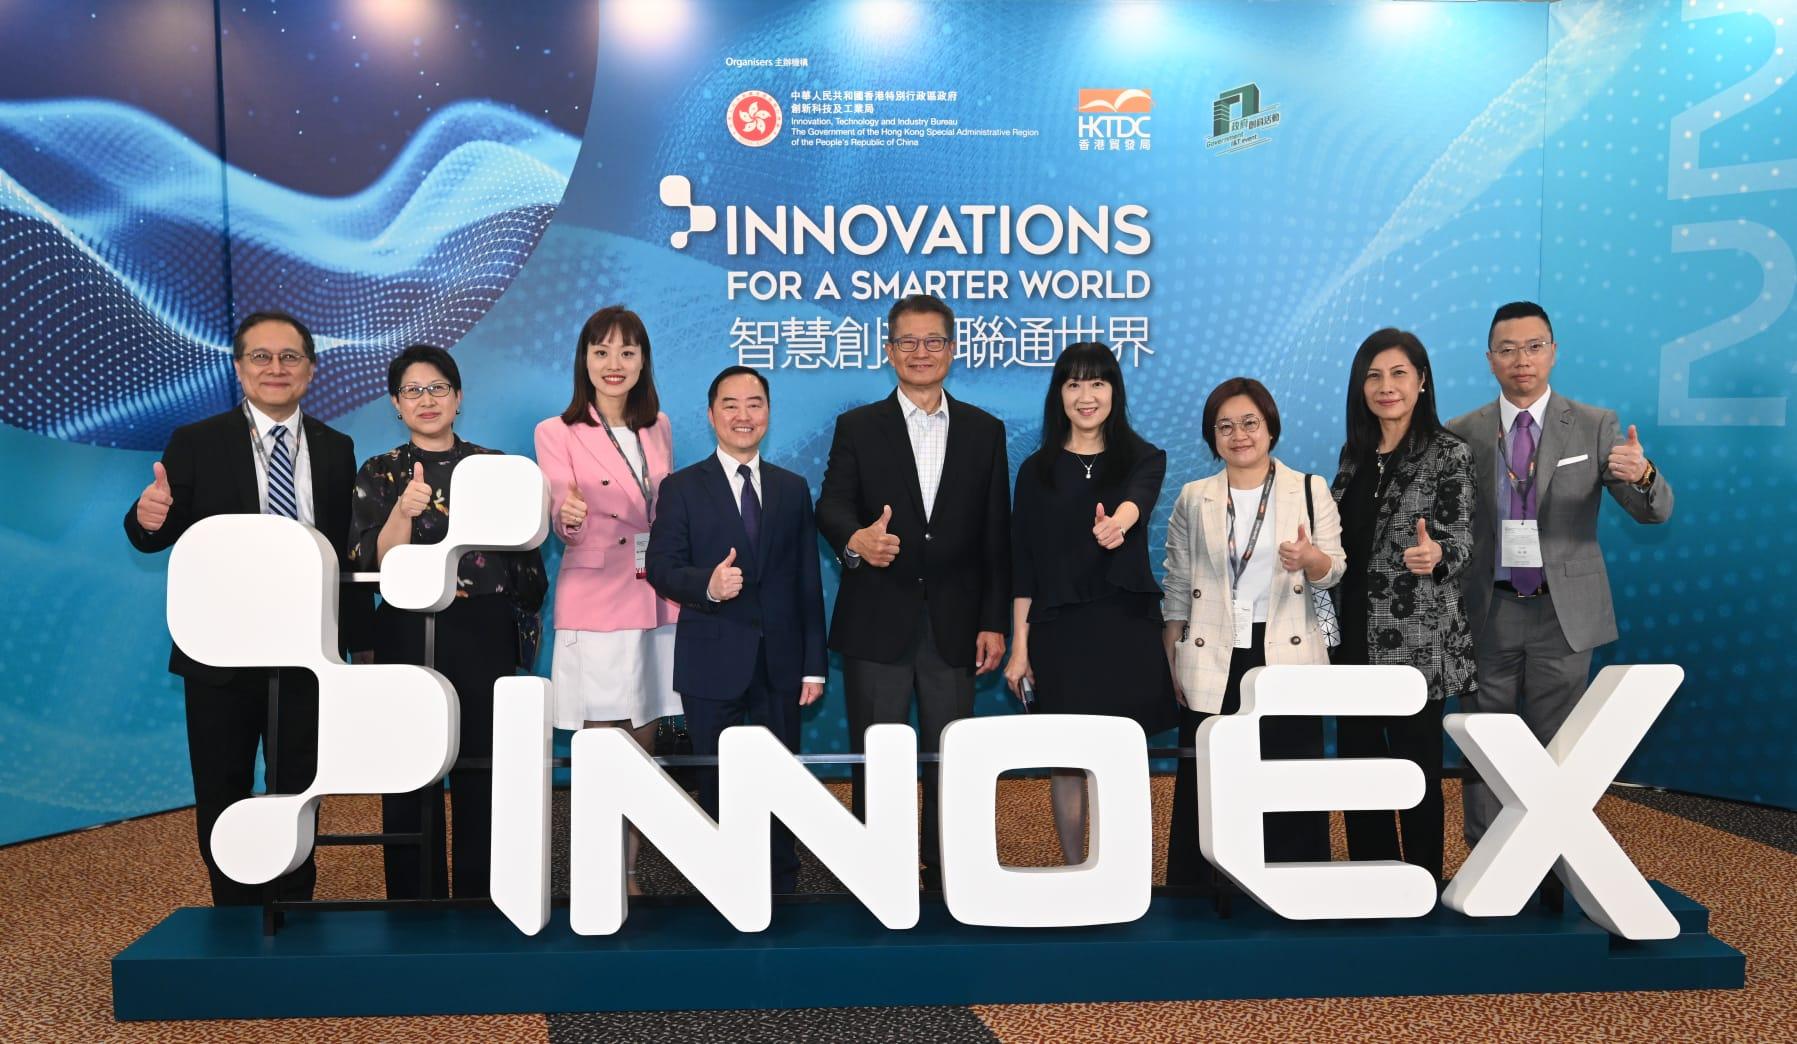 The Financial Secretary, Mr Paul Chan, visited the InnoEX today (April 13). Mr Chan (centre) is pictured with the Under Secretary for Innovation, Technology and Industry, Ms Lillian Cheong (third left); the Government Chief Information Officer, Mr Tony Wong (fourth left); the Executive Director of the Hong Kong Trade Development Council, Ms Margaret Fong (fourth right) and other guests.